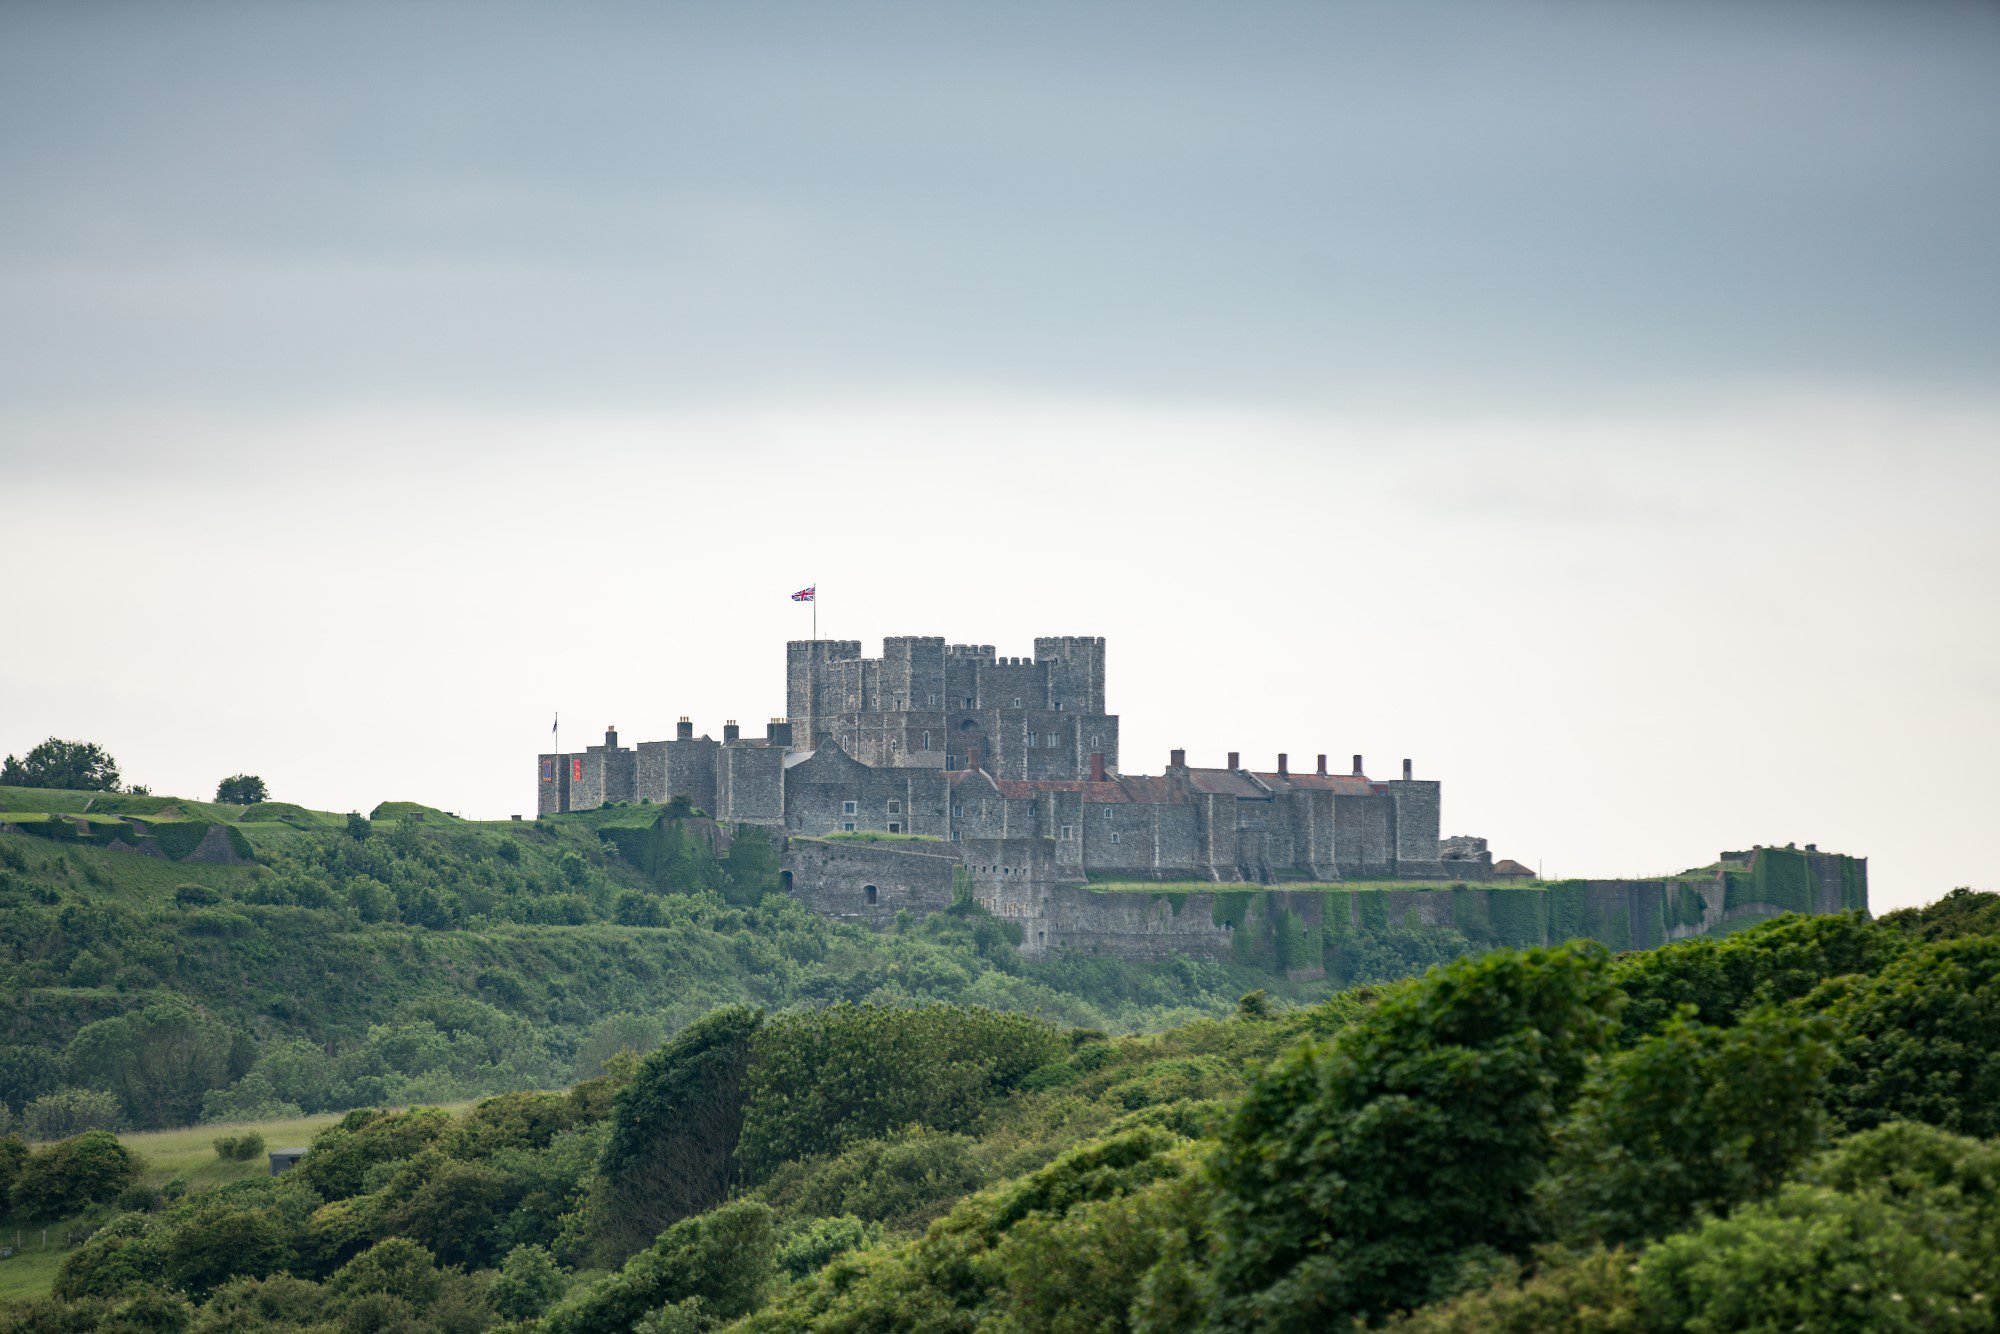 View of Dover Castle and surrounding grounds, on a misty day.